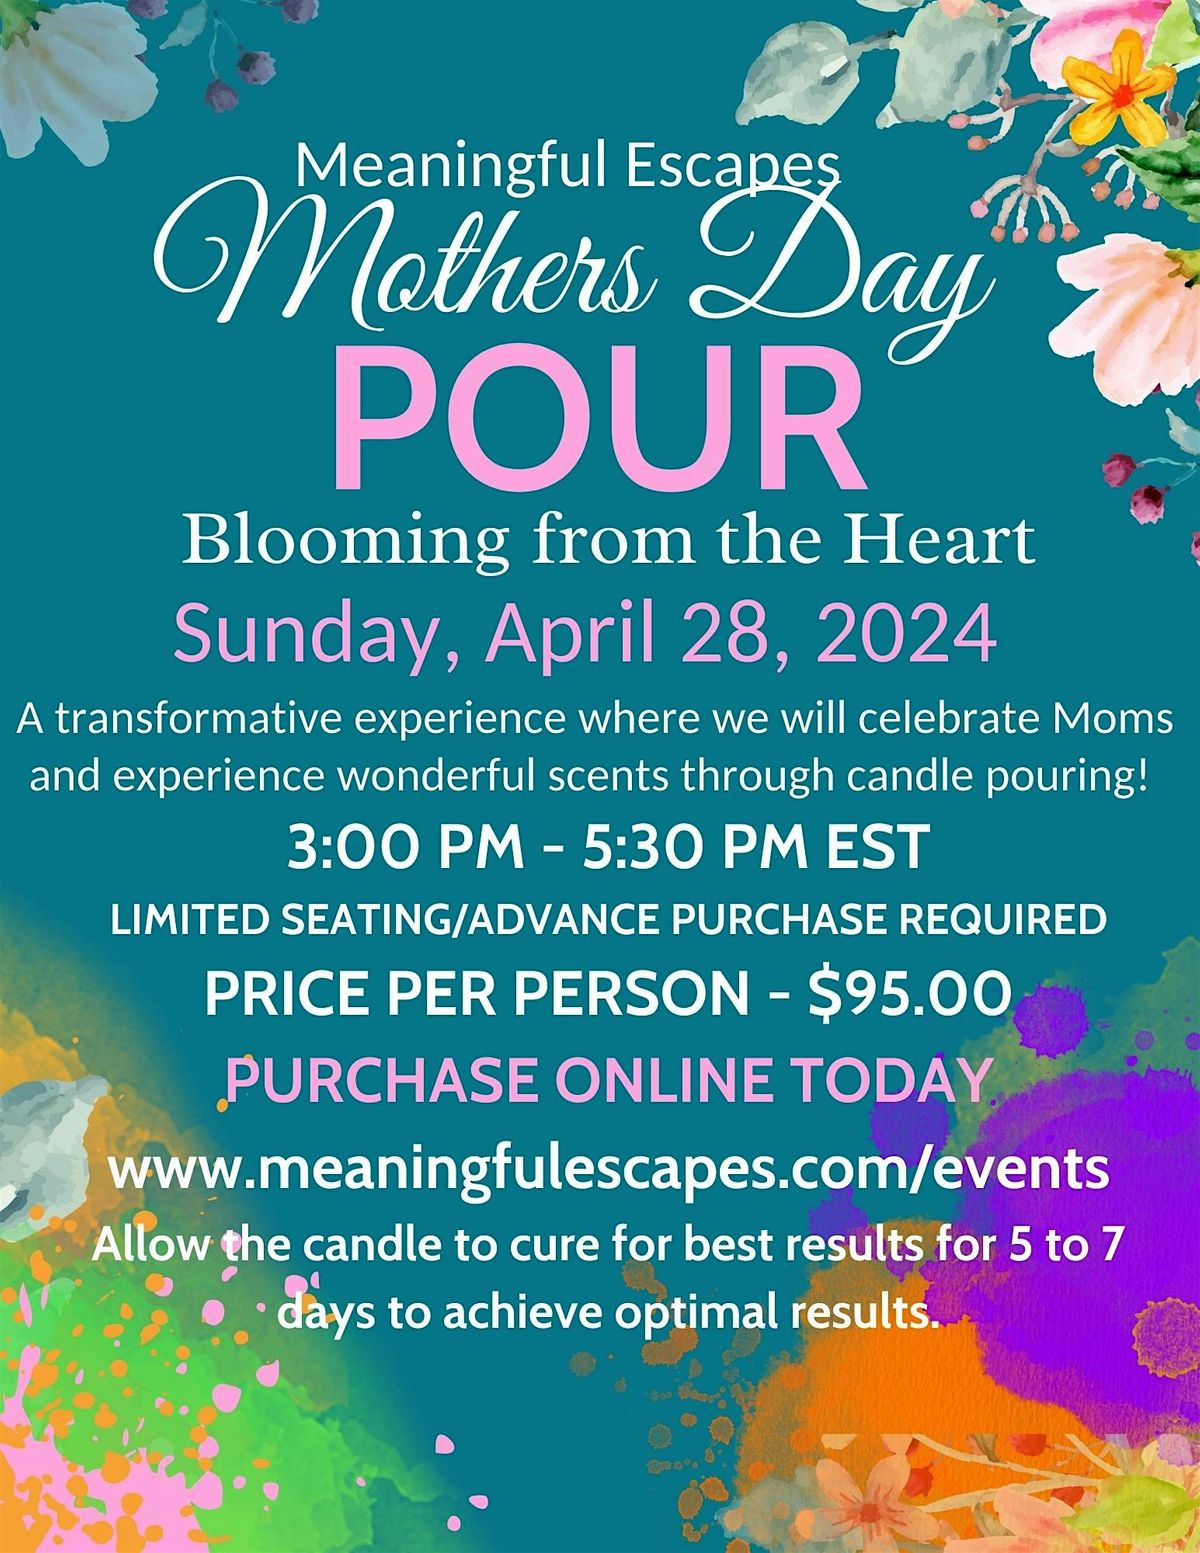 Mother's Day Pour-Blooming from the Heart!